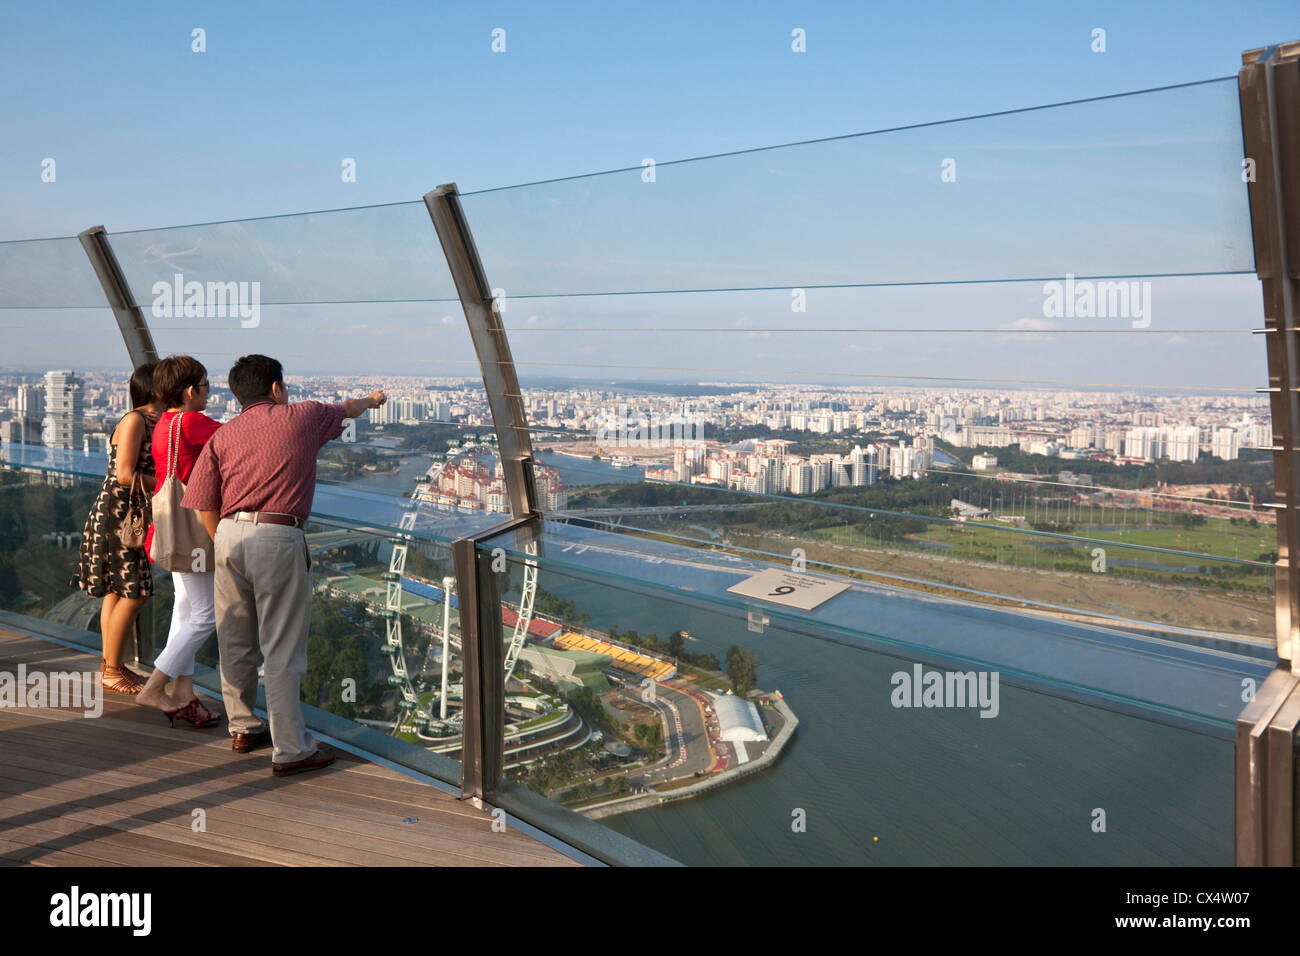 Visitors look out over Singapore from the observation deck of the Marina Bay Sands SkyPark. Marina Bay, Singapore Stock Photo